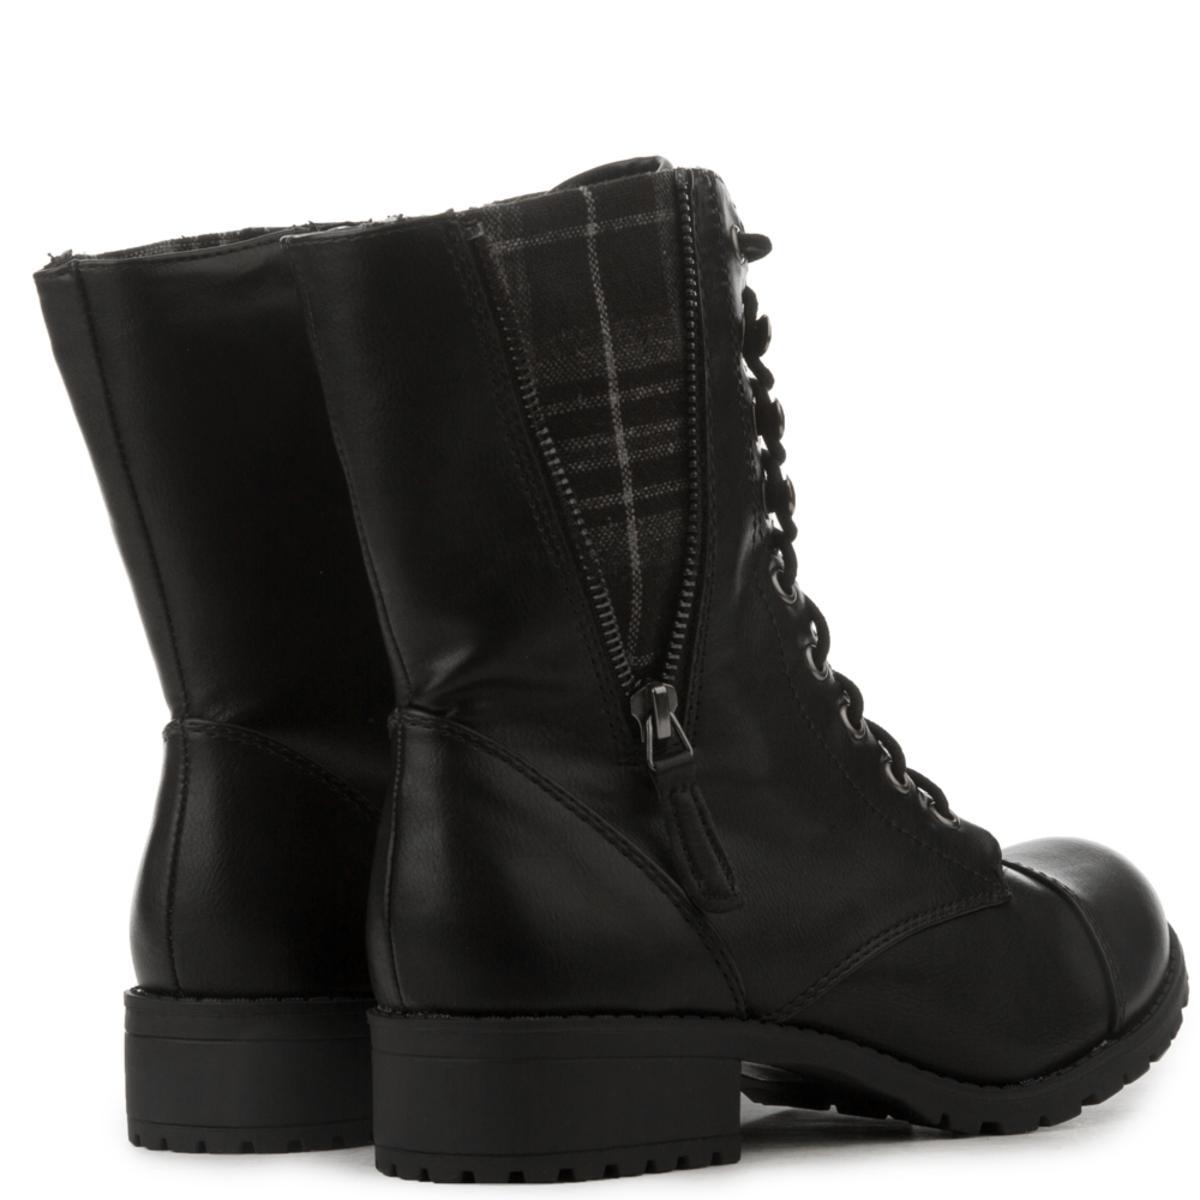 Footer-S Lace-Up Combat Boot BLACK